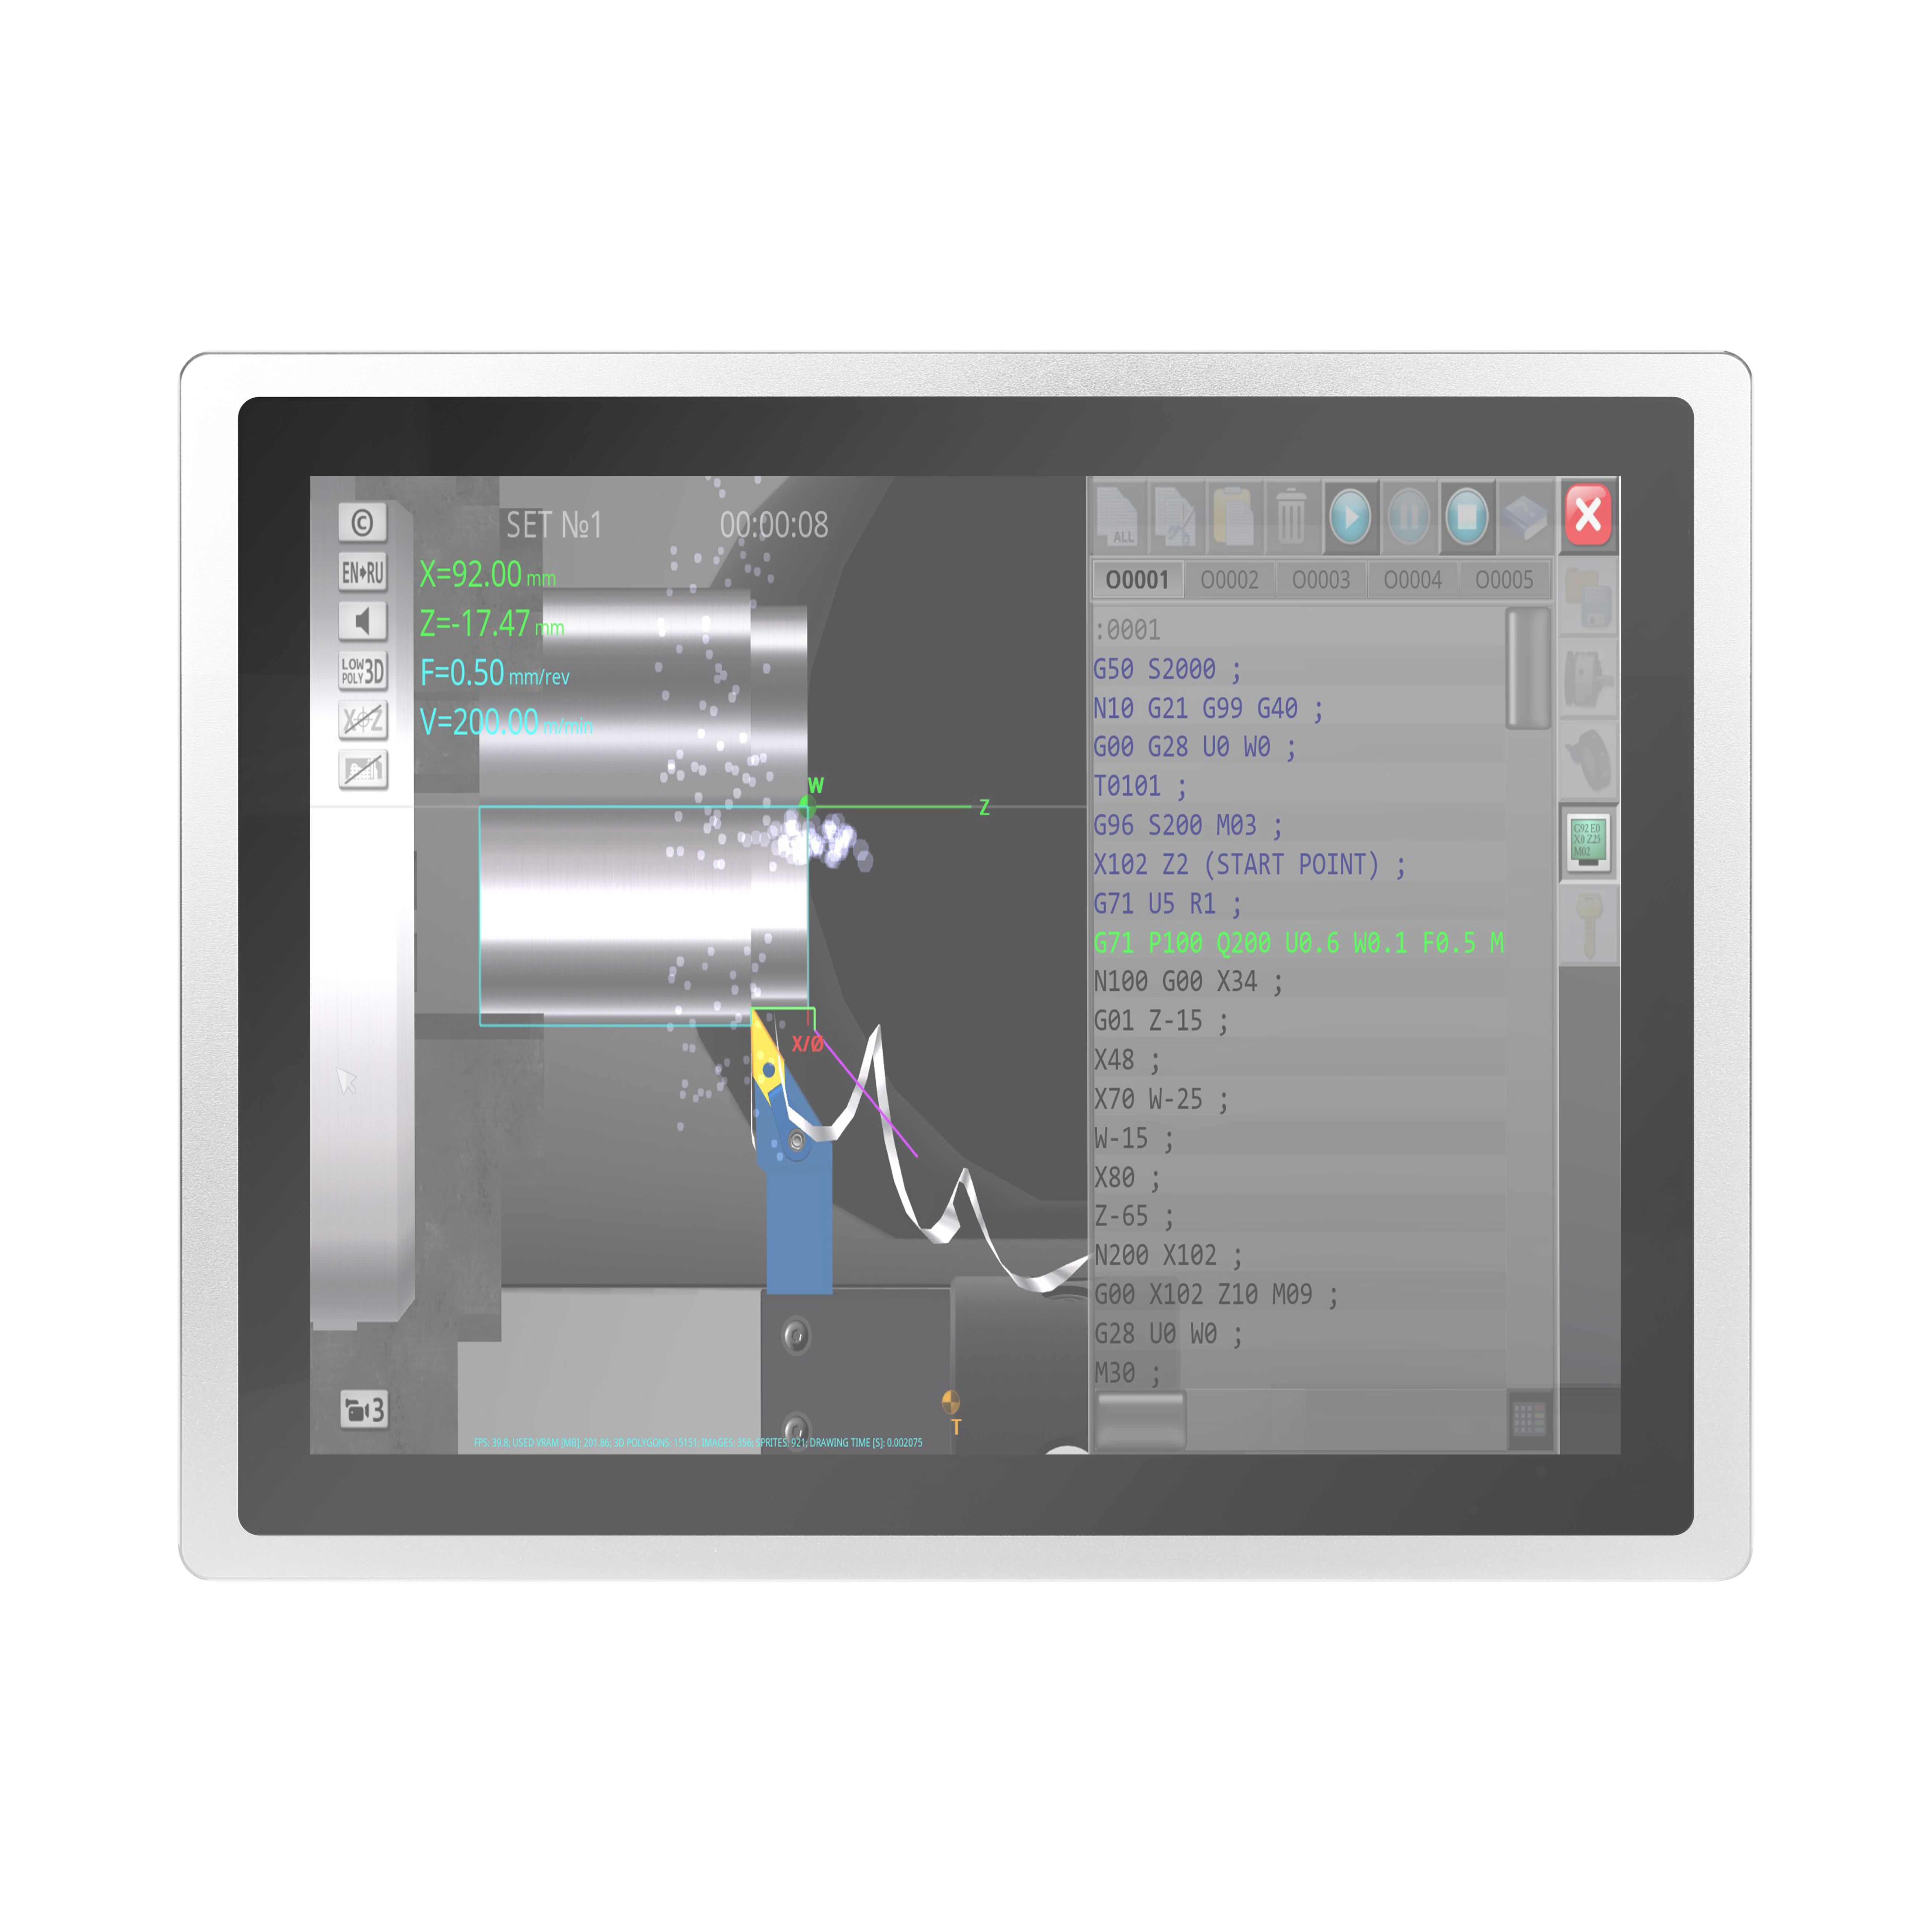 New Touch Panel Industrial PC Launched | Vision Systems Design